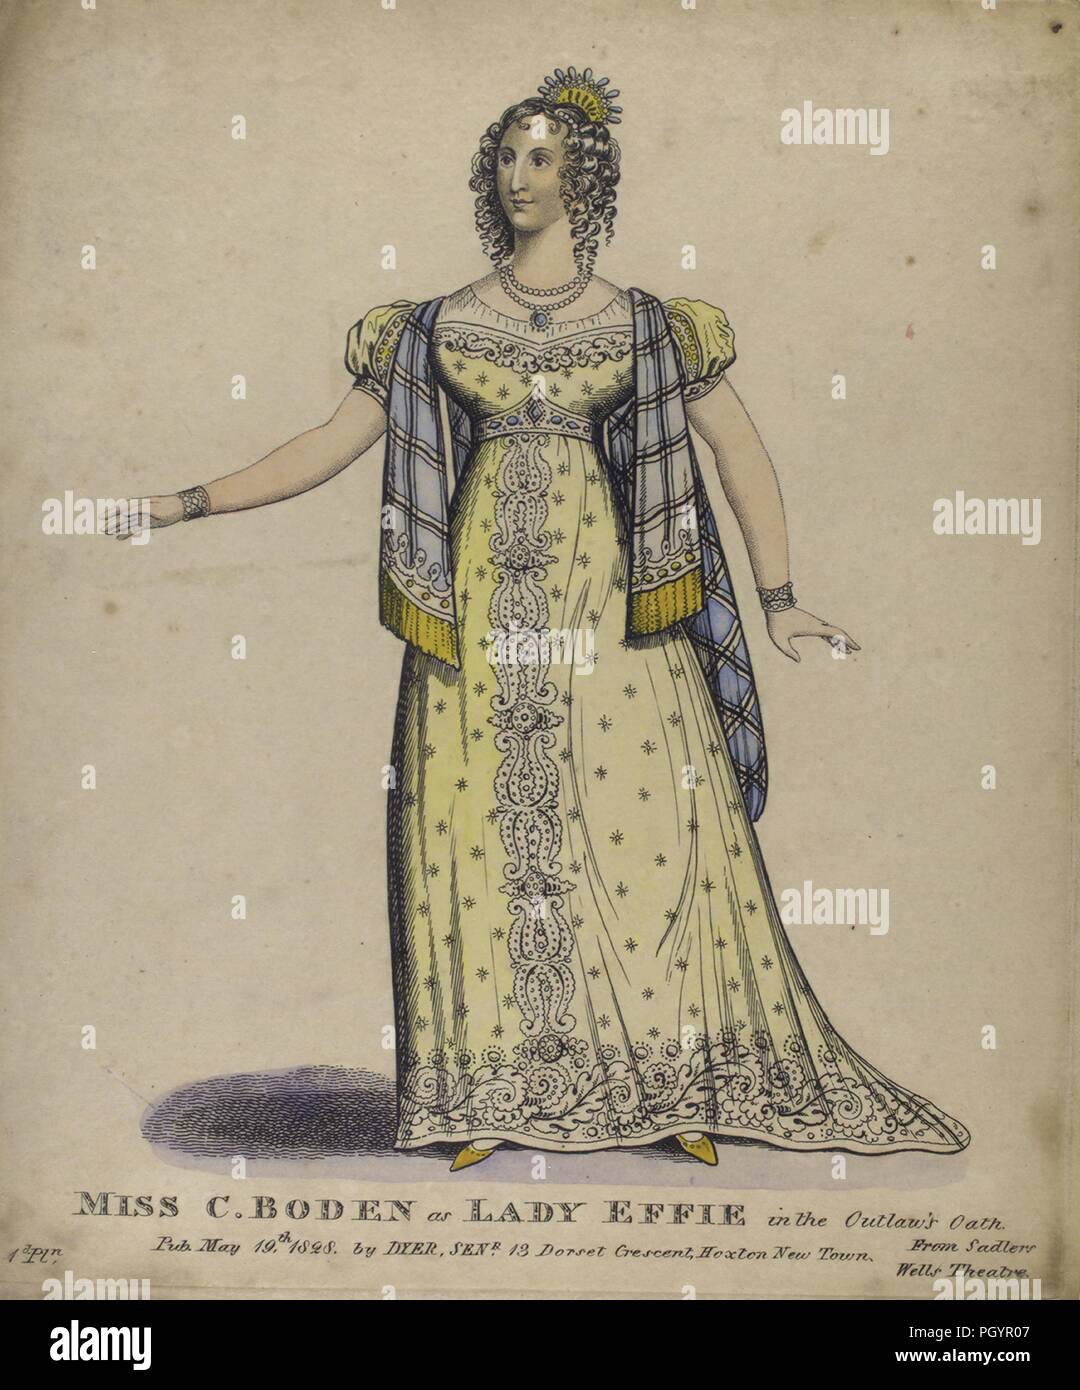 Lithograph of theatre portrait depicting the actor Miss C Boden as Lady Effie in the Outlaw's Oath, 1828. From the New York Public Library. () Stock Photo